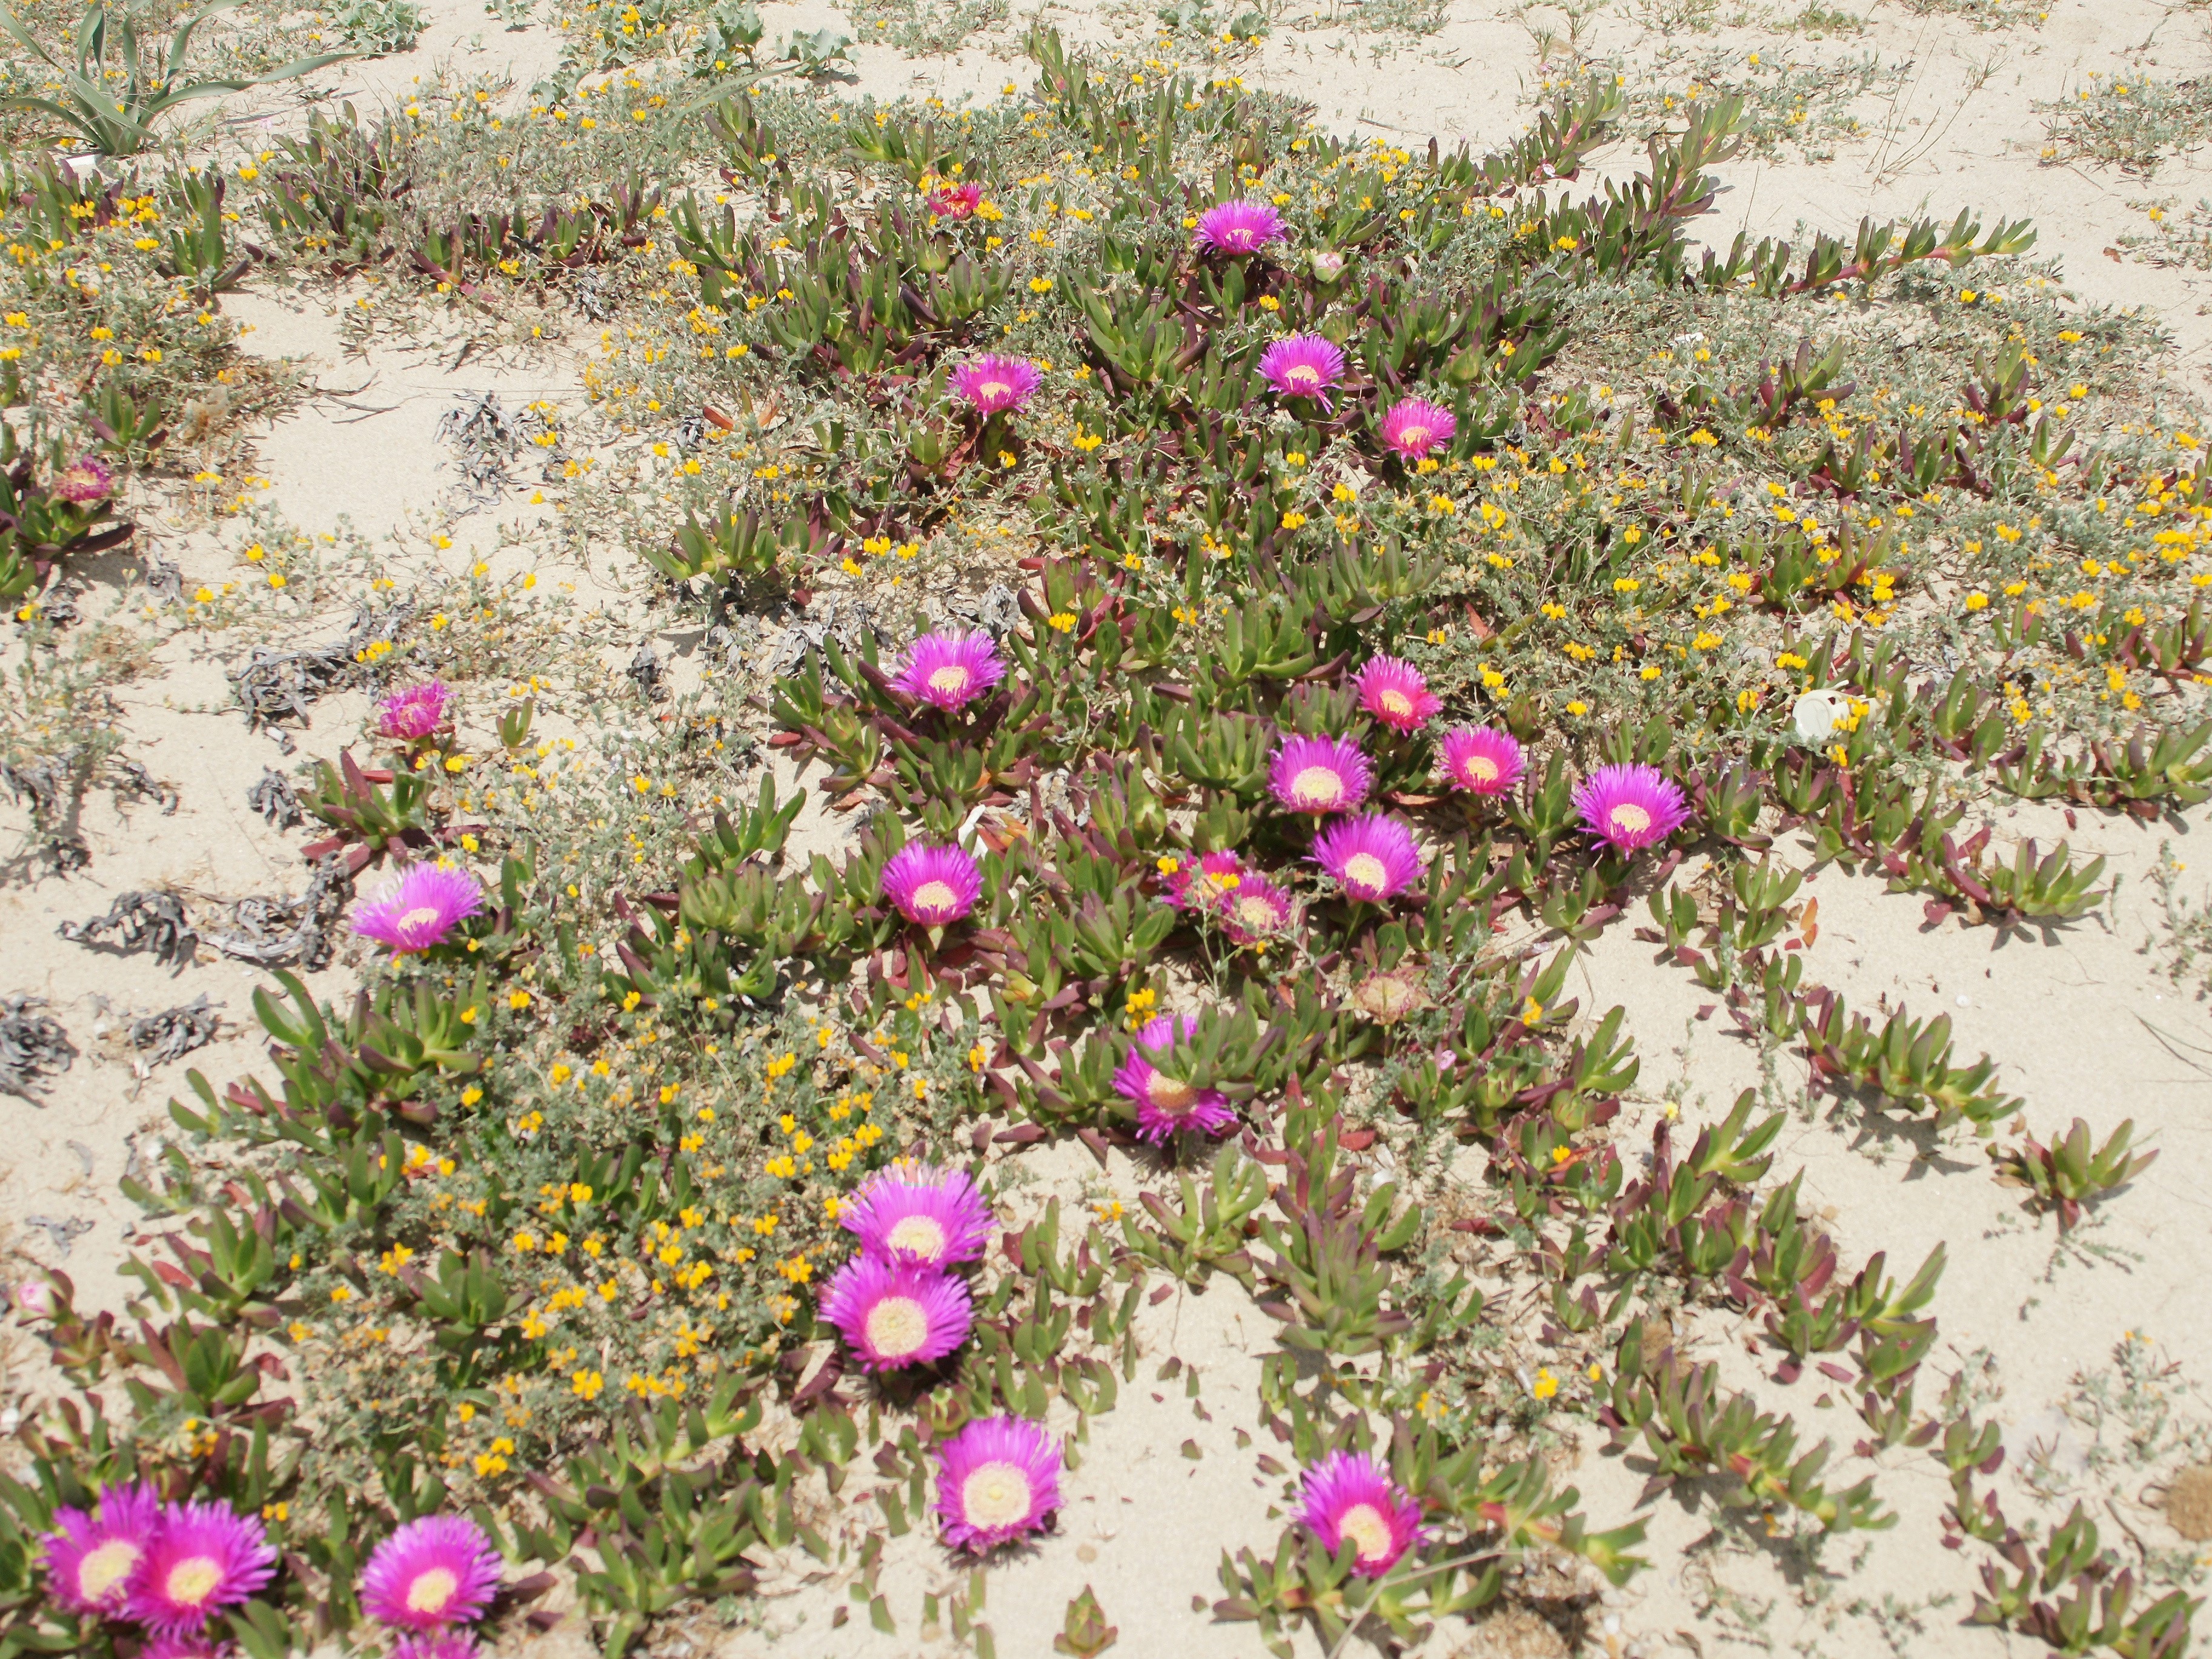 Iceplant or Hottentot fig